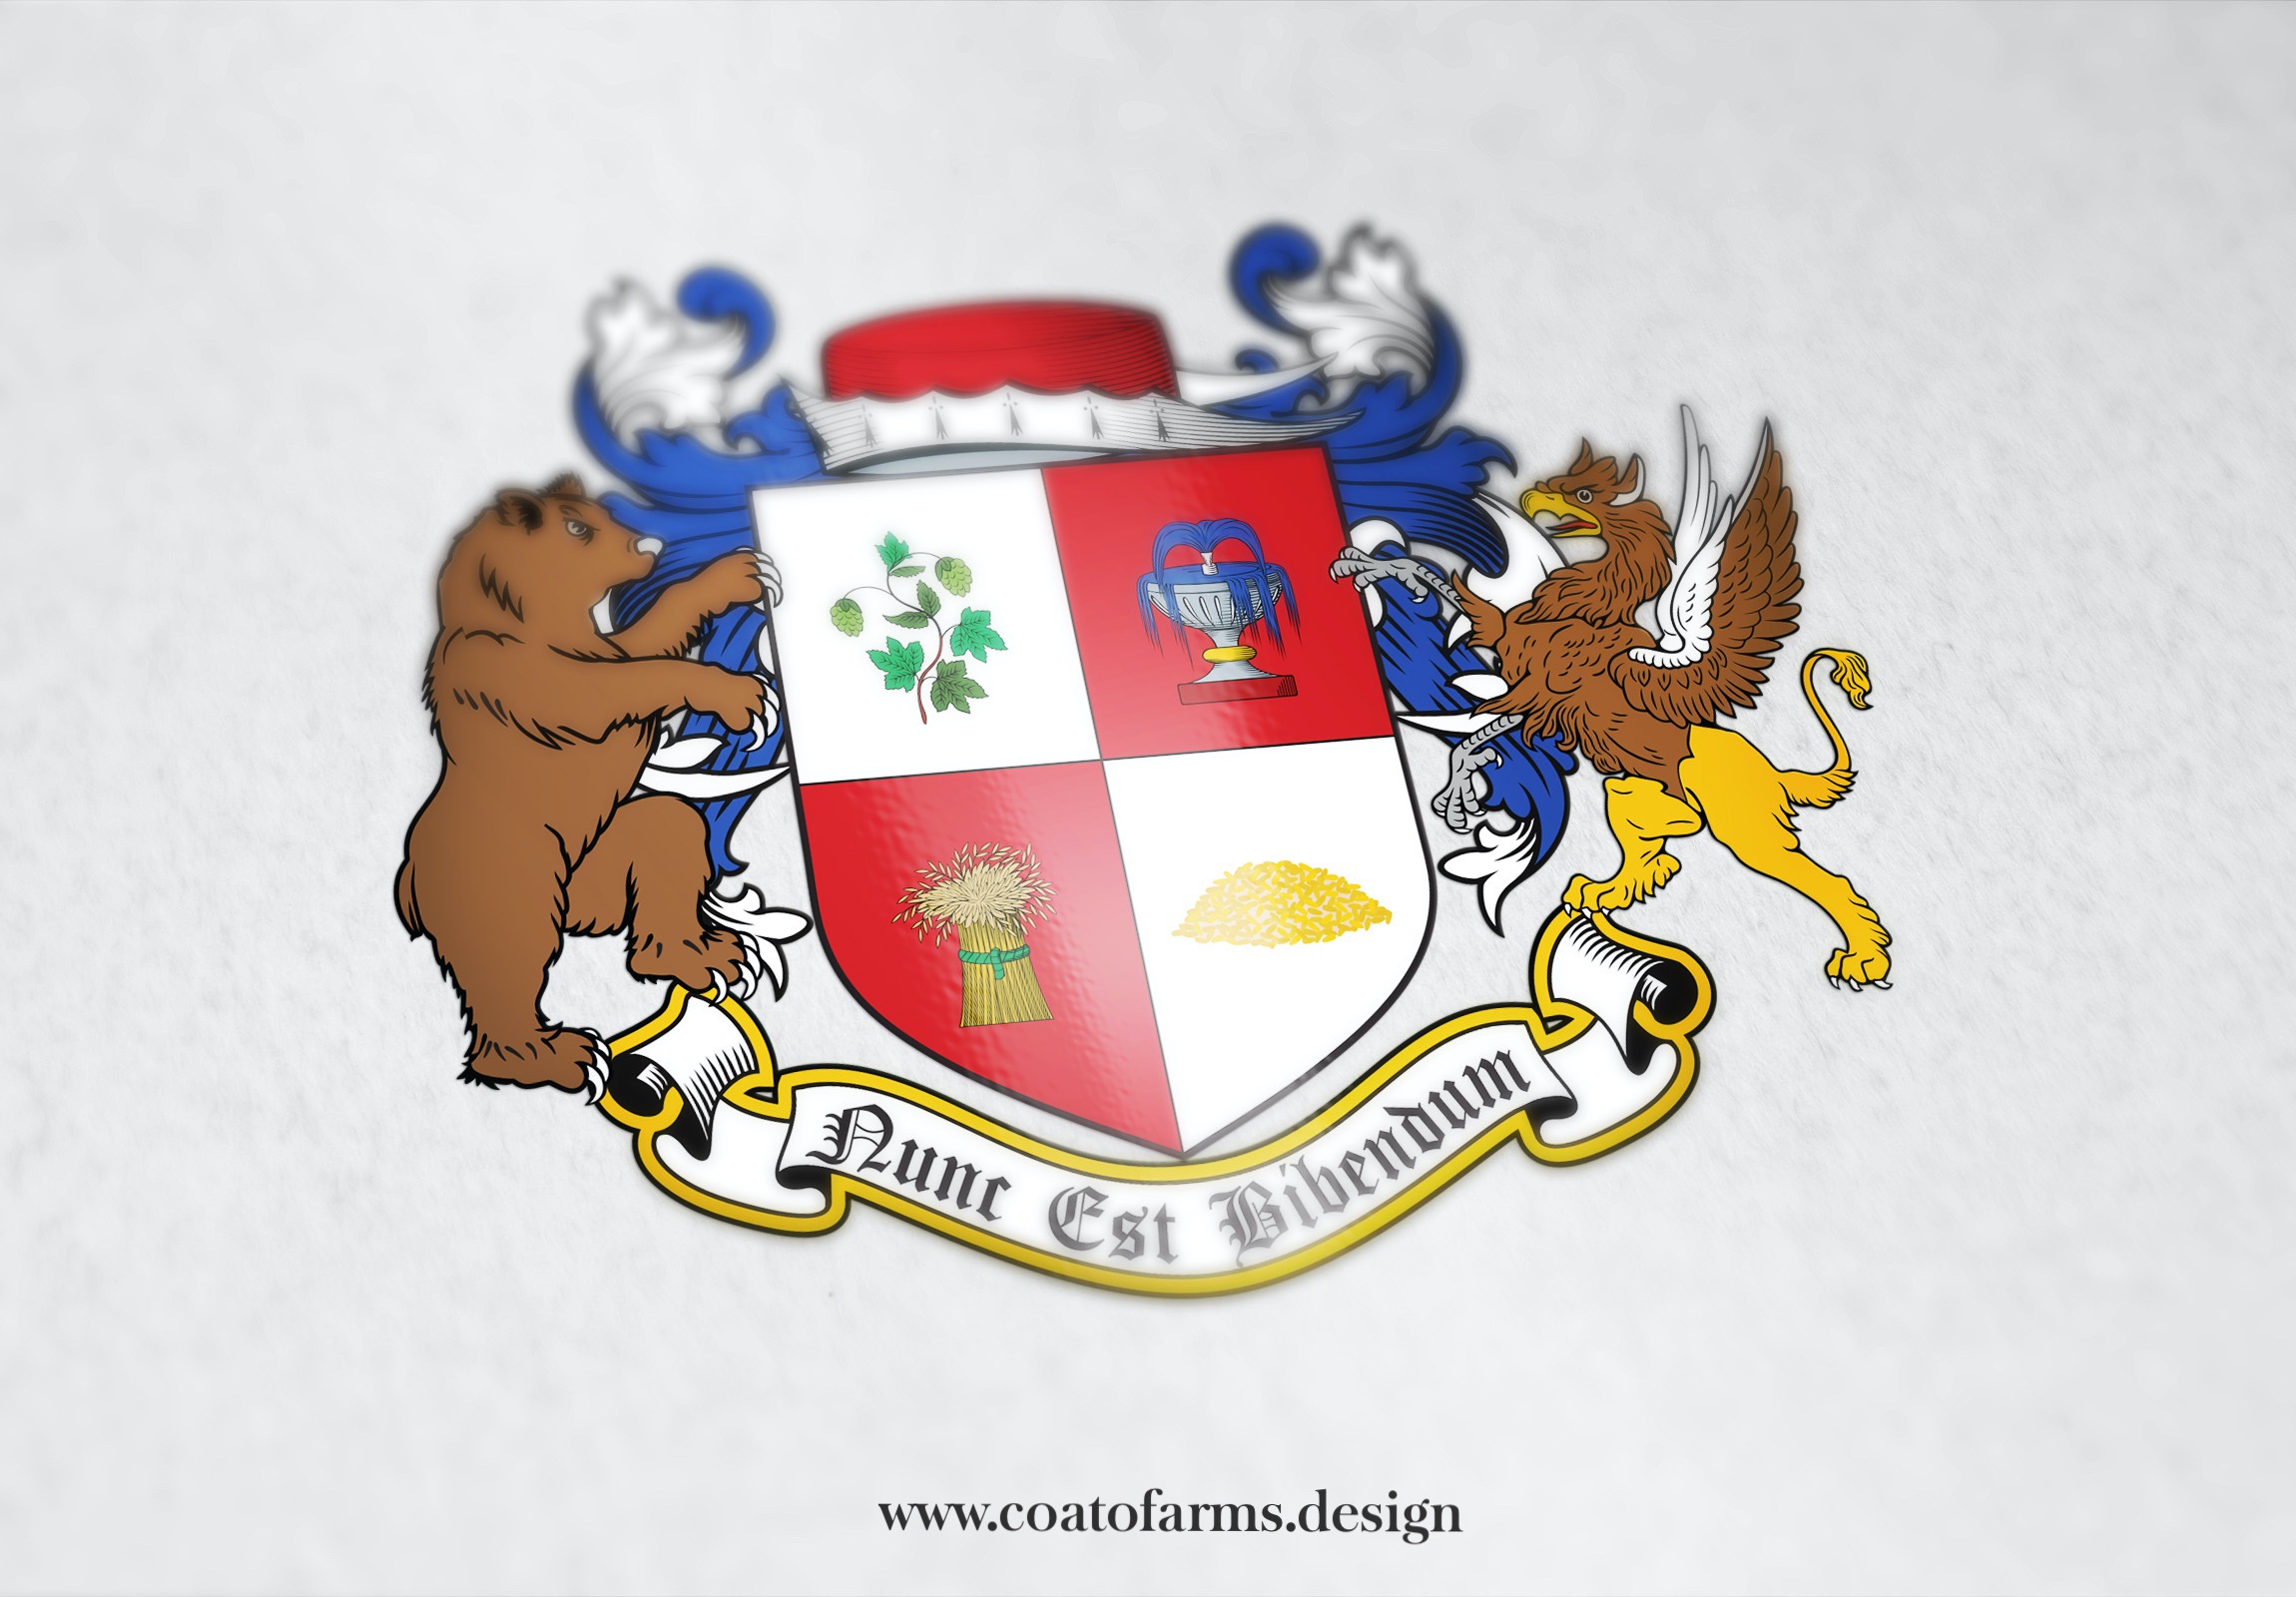 Coat of arms (emblem) I designed for a beer club from Australia